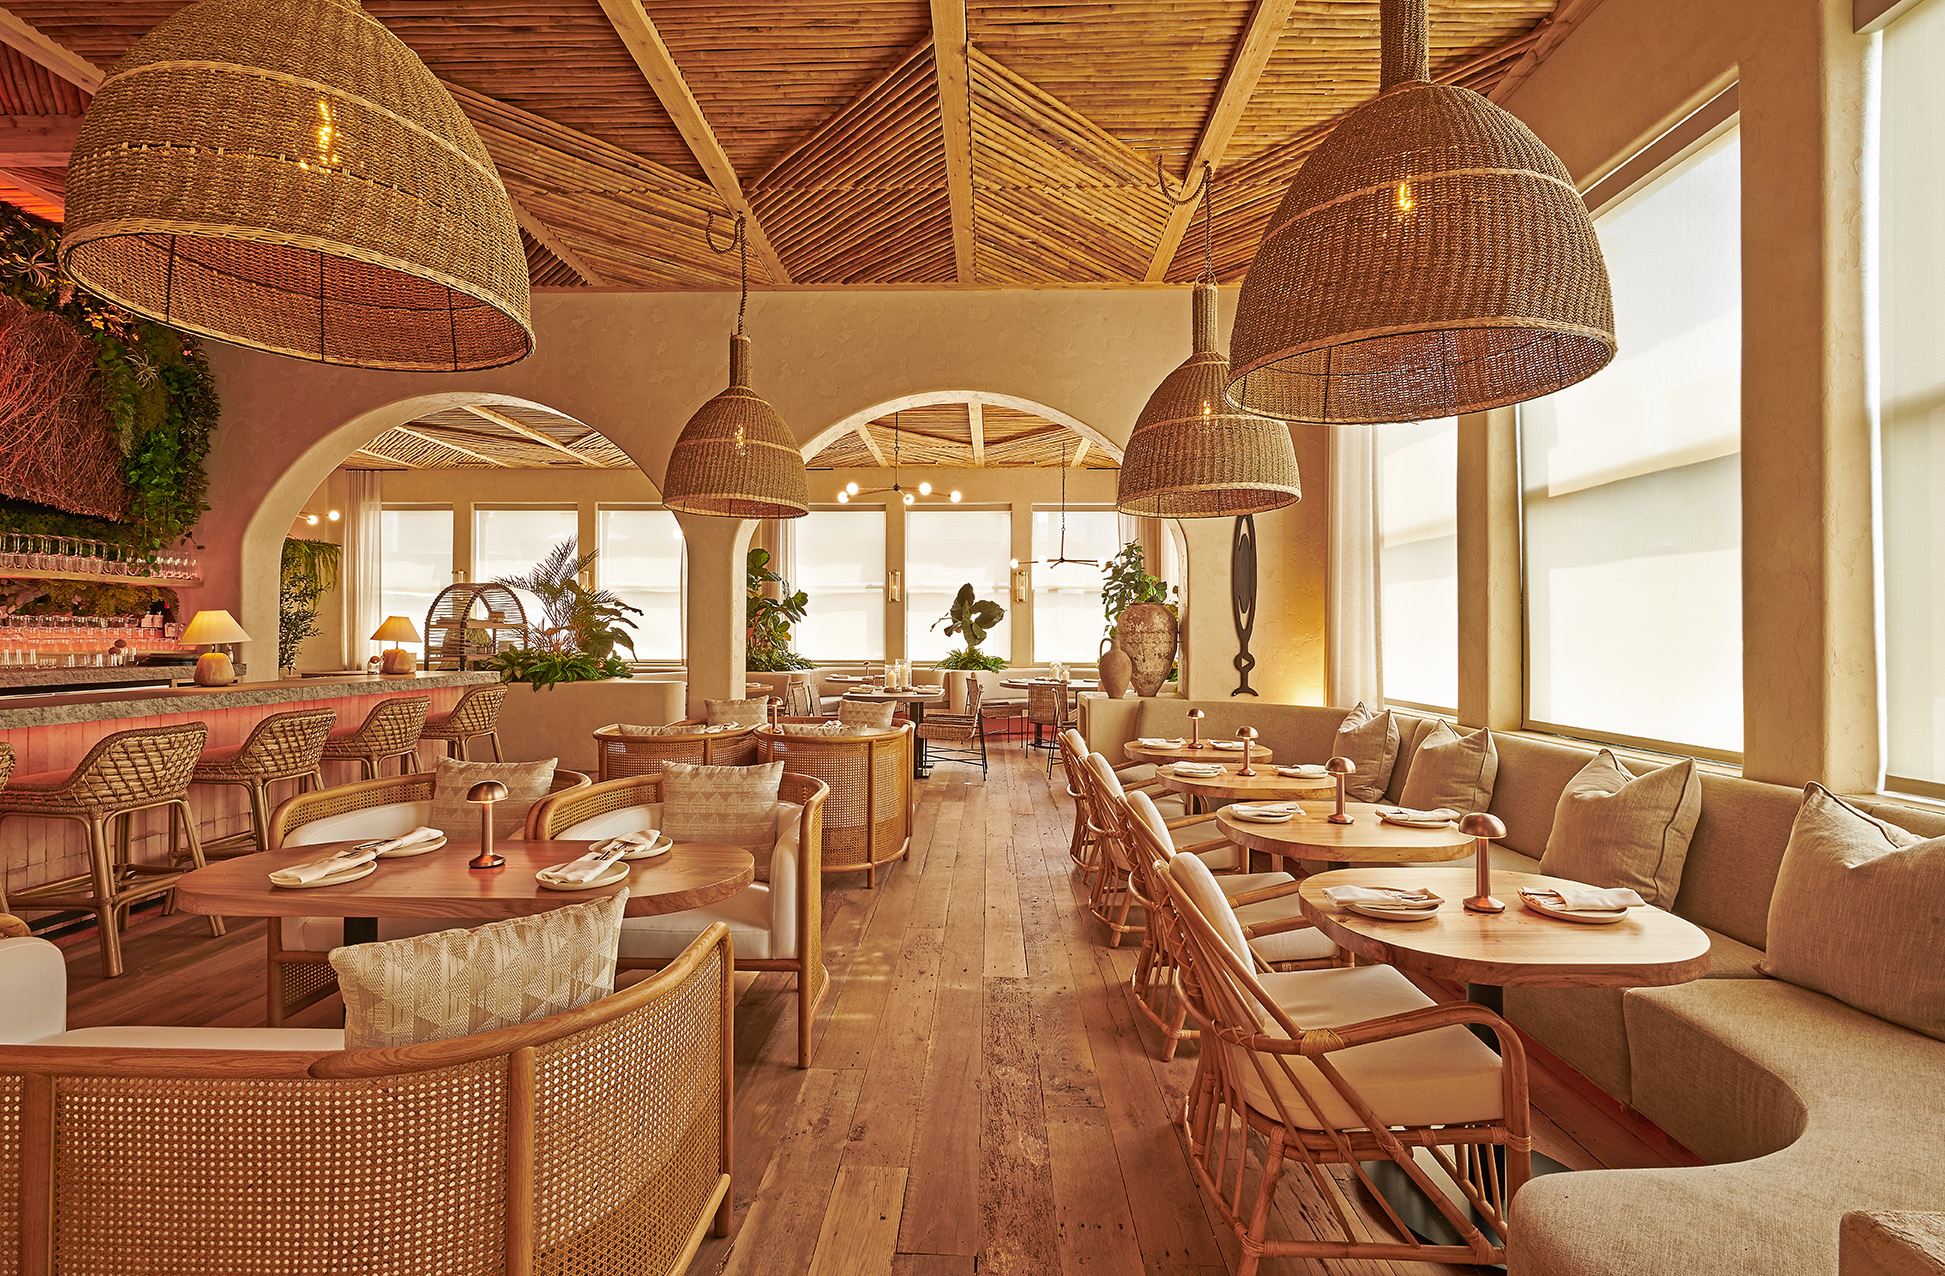 A golden dining room with wooden floors, curved banquettes, and wicker covered hanging lamps.